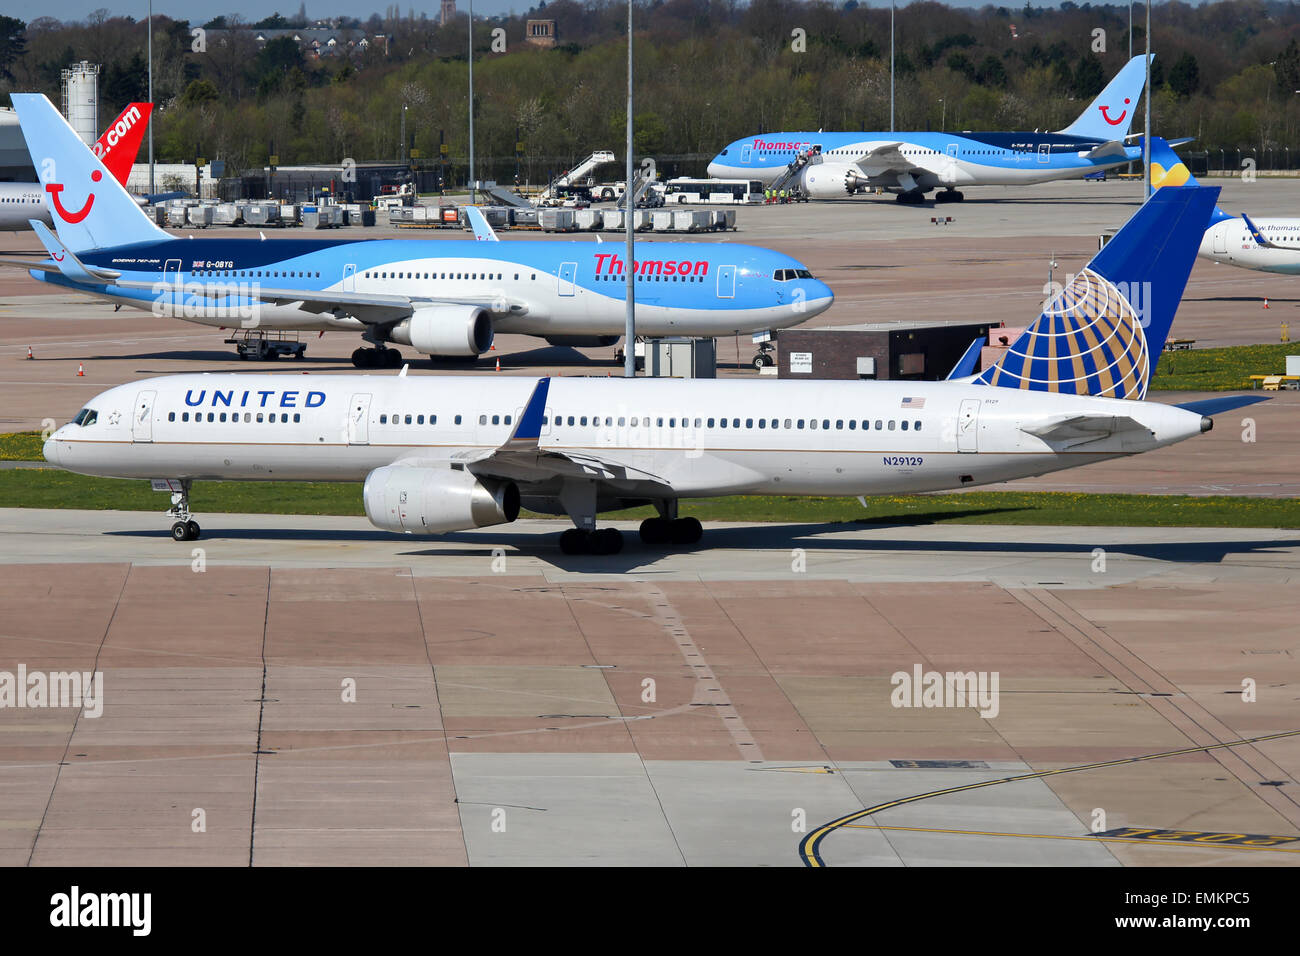 United Airlines Boeing 757-200 taxis to the active runway at Manchester airport. Stock Photo